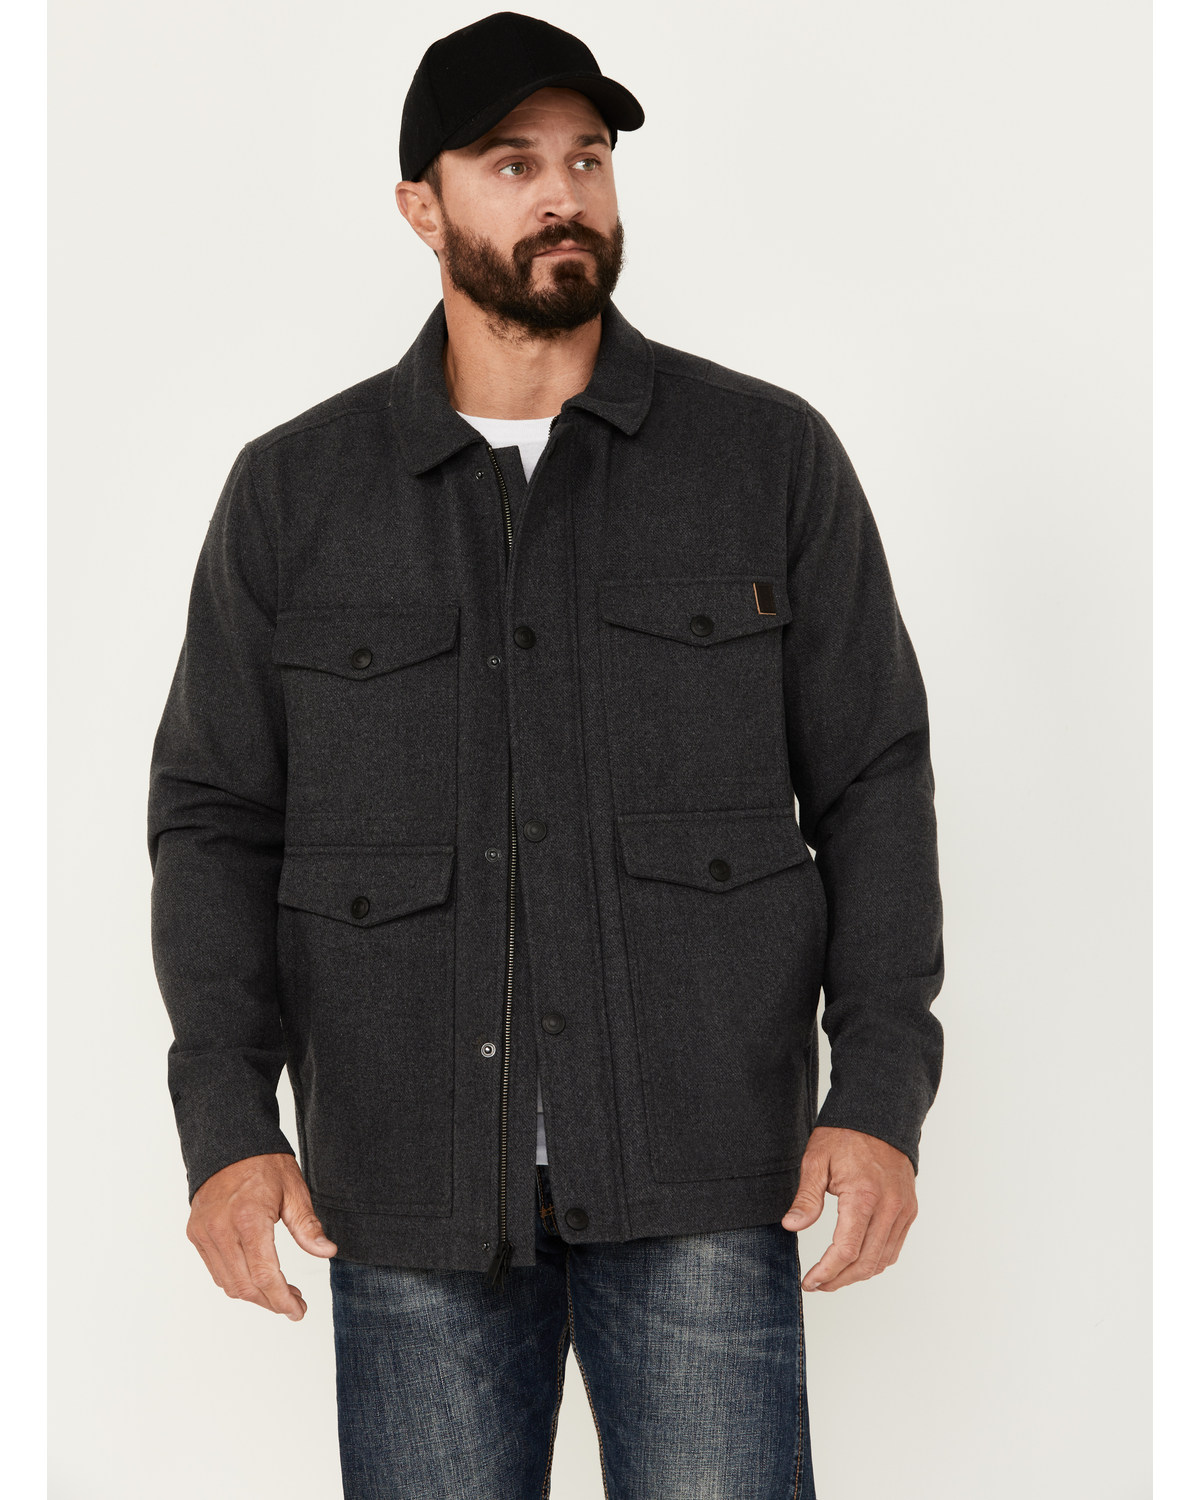 Brothers and Sons Men's Crockett Wool Flannel Lined Snap Jacket